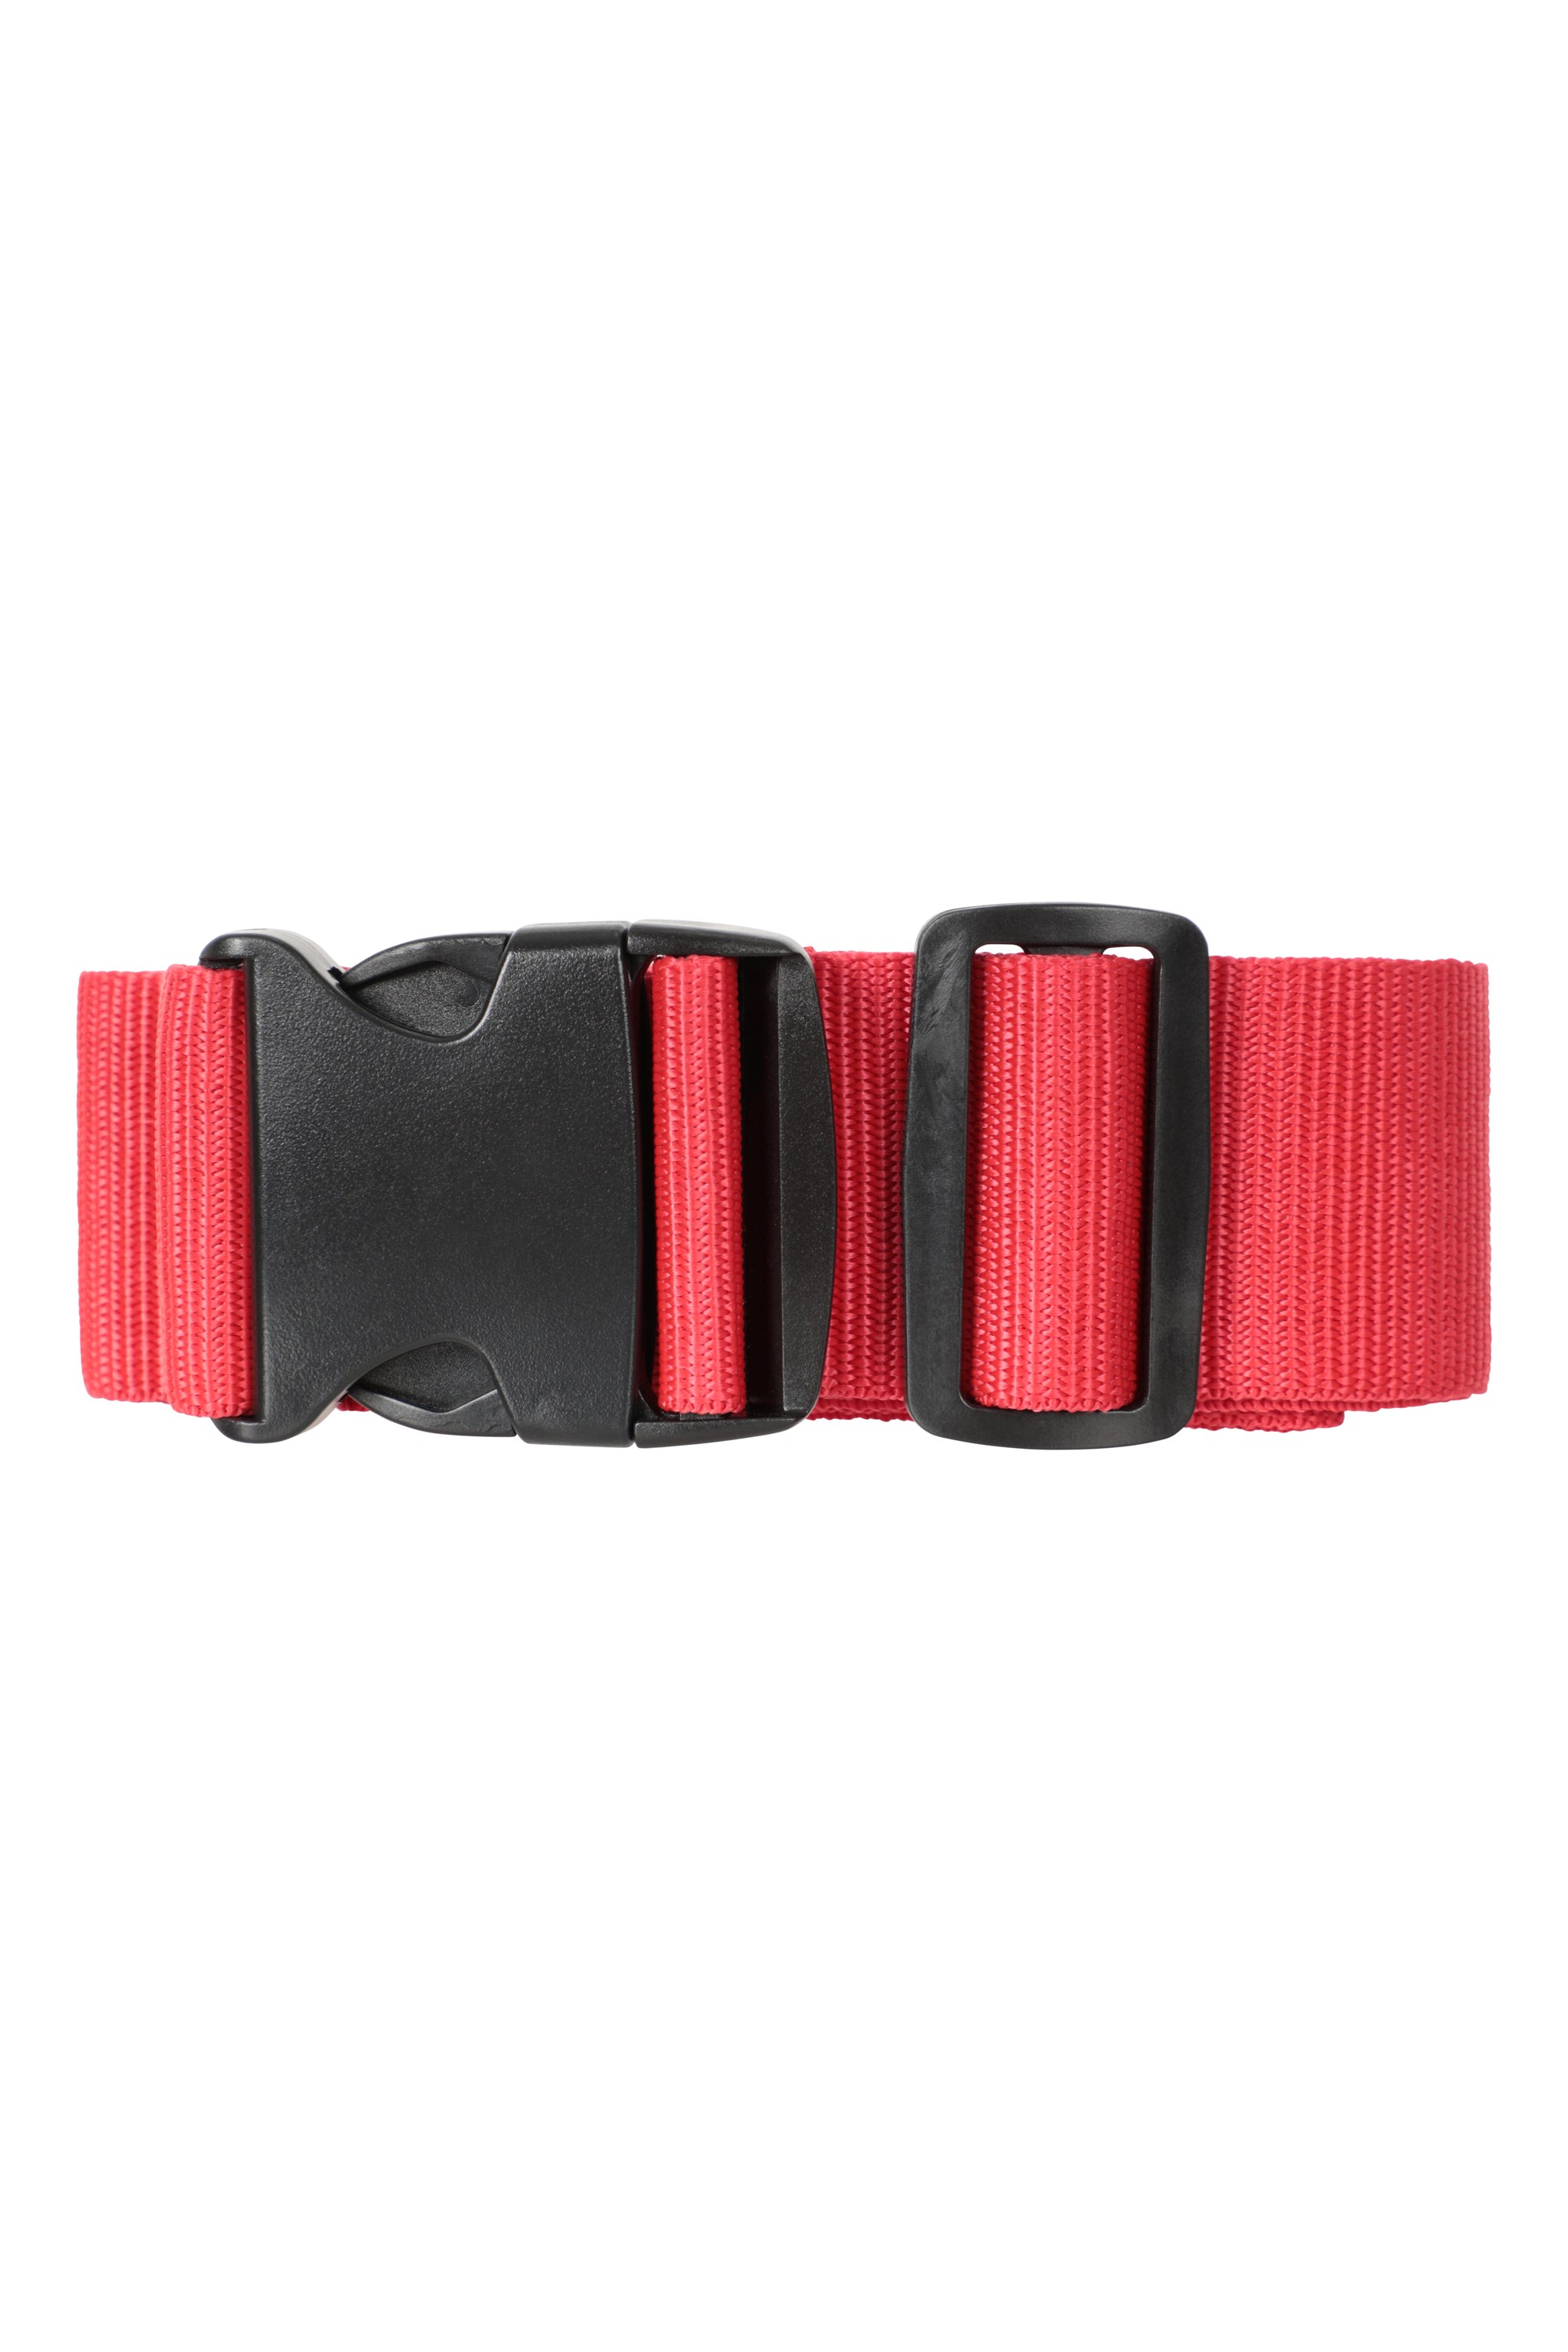 Luggage Strap - Red